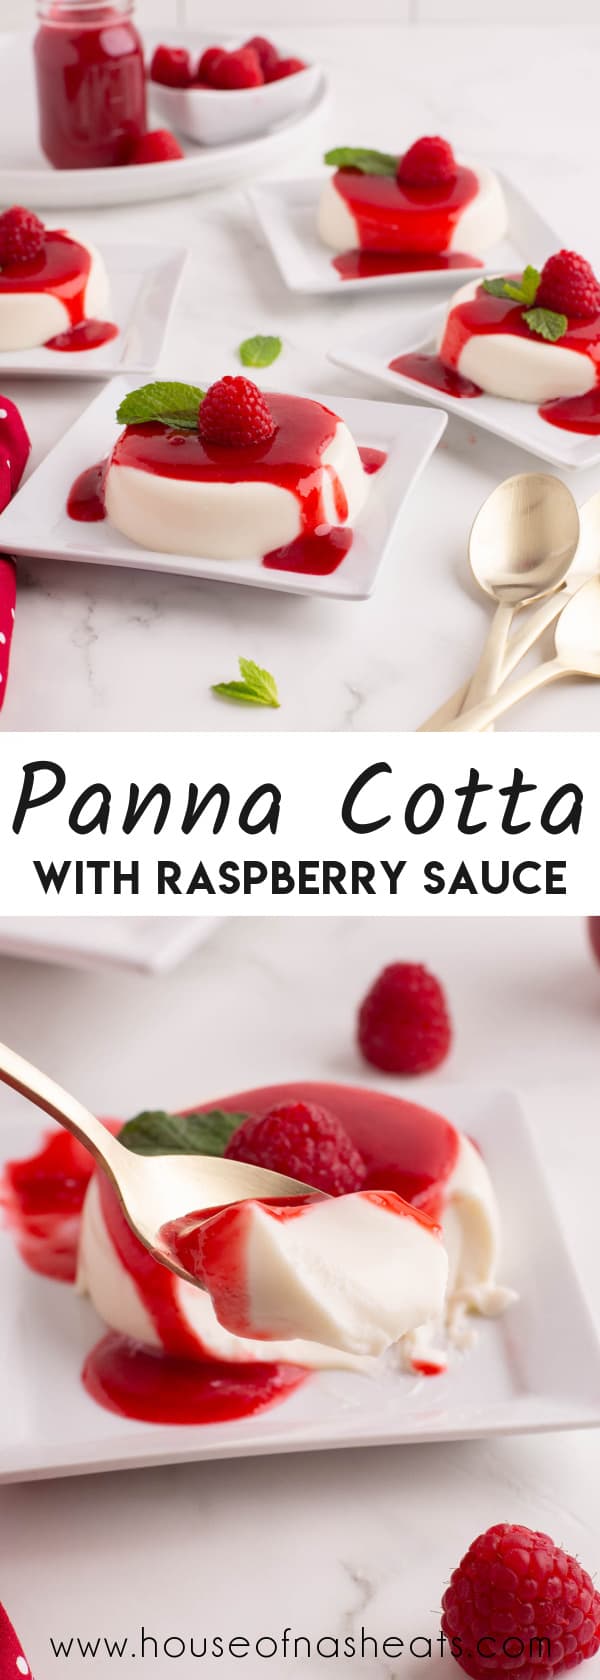 A collage of images of panna cotta with raspberry sauce with text overlay.